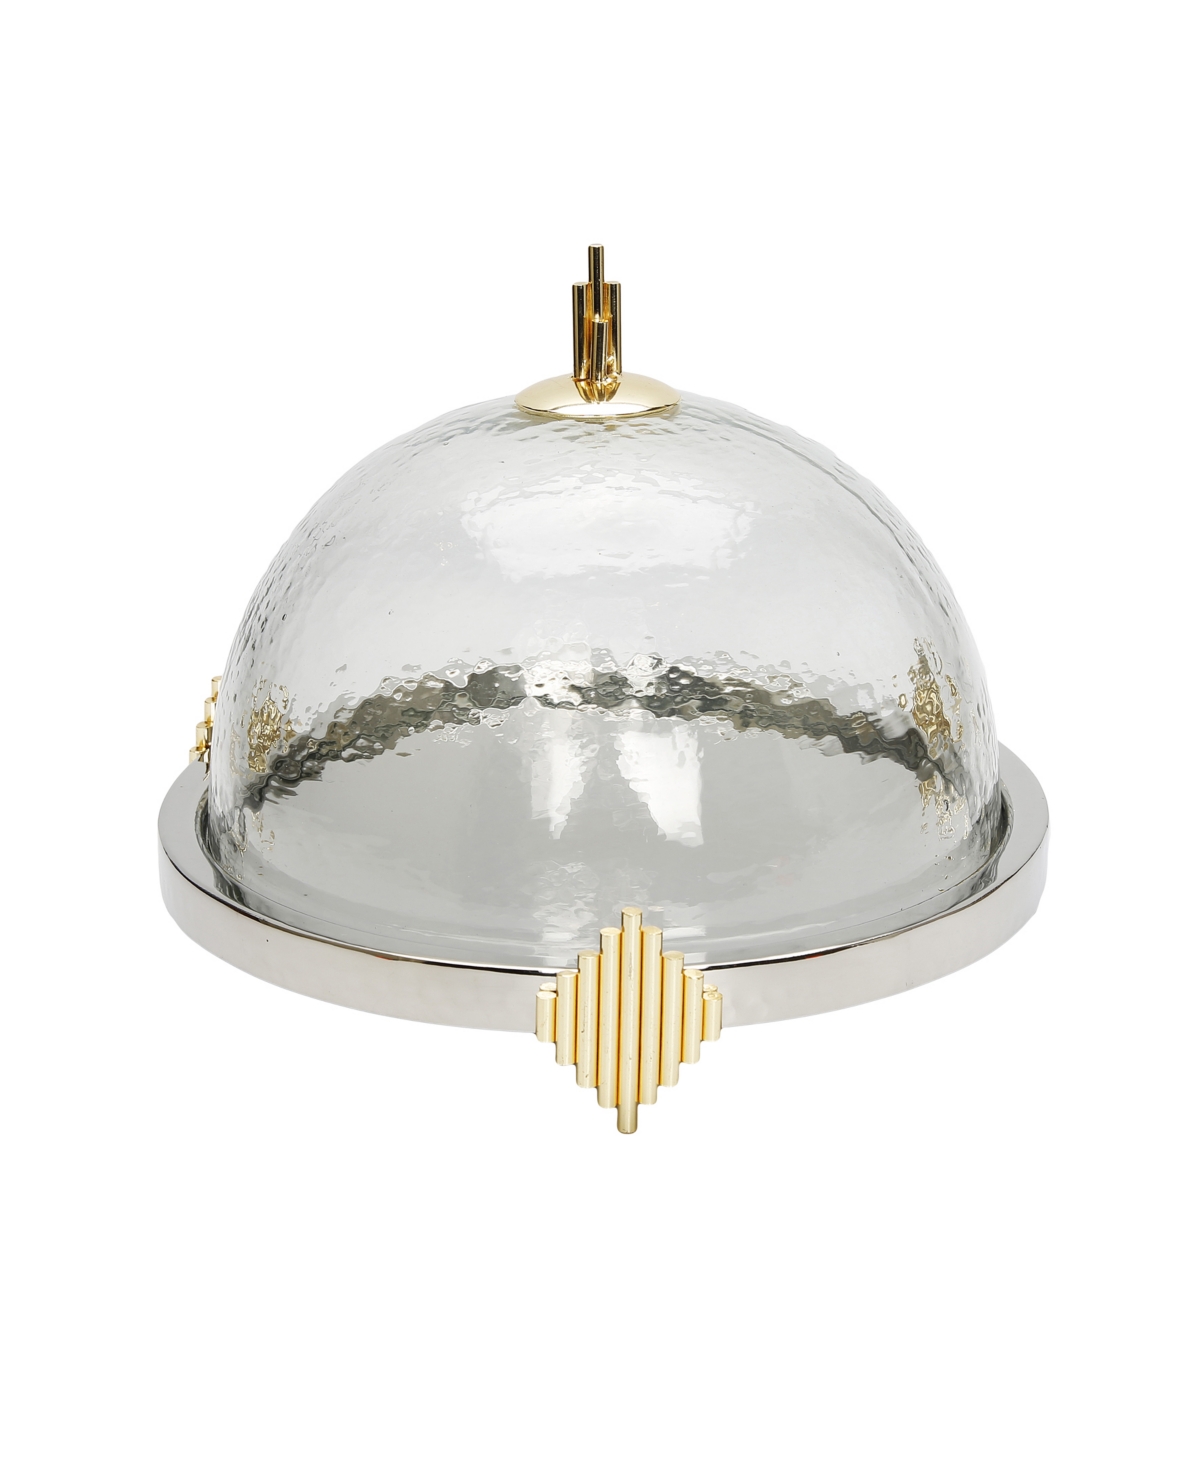 Cake Dome with Stainless Steel Base Symmetrical Design - Gold